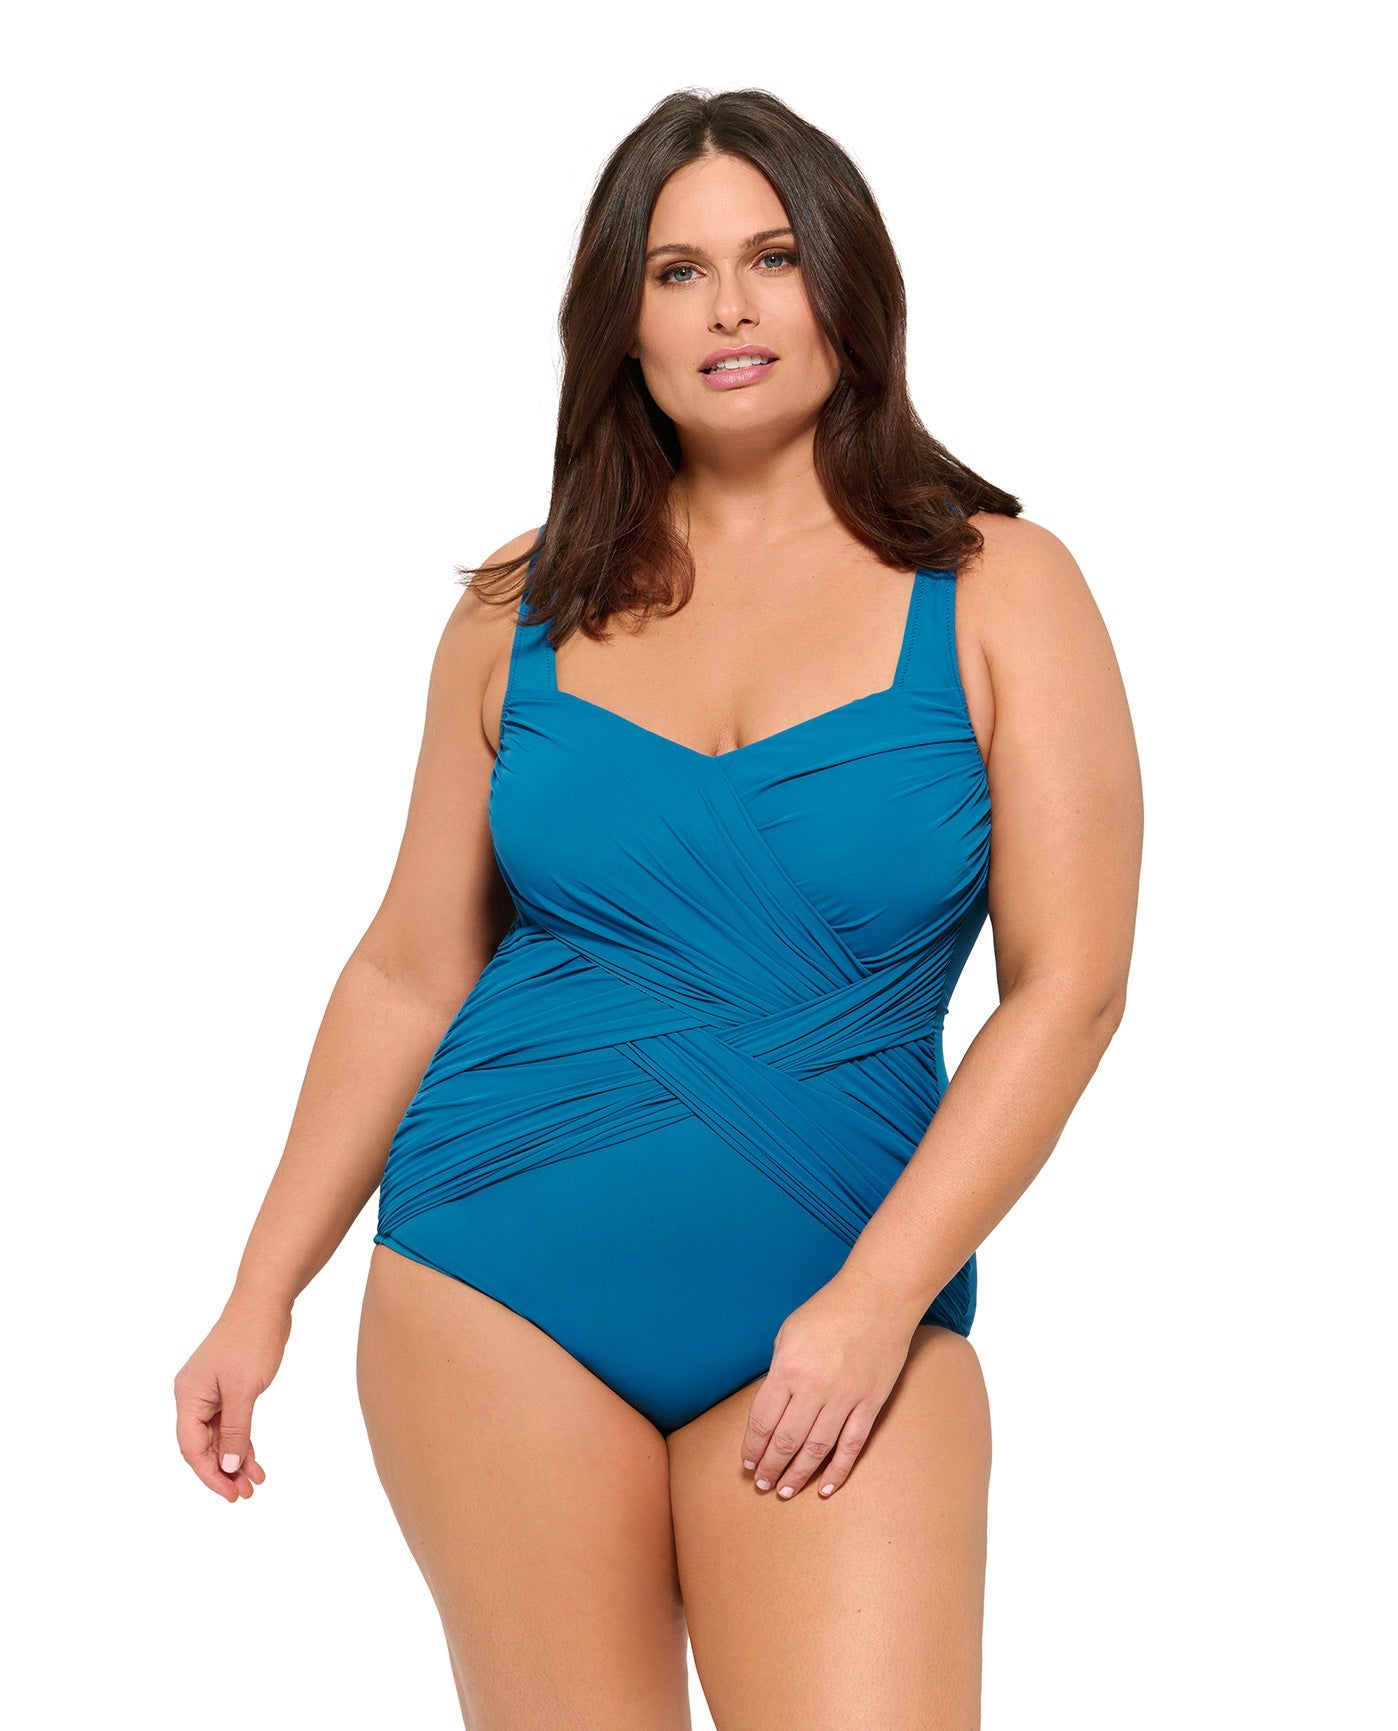 Front View Of Gottex Braided Elegance Plus Size Shaped Square Neck One Piece Swimsuit | Gottex Braided Elegance